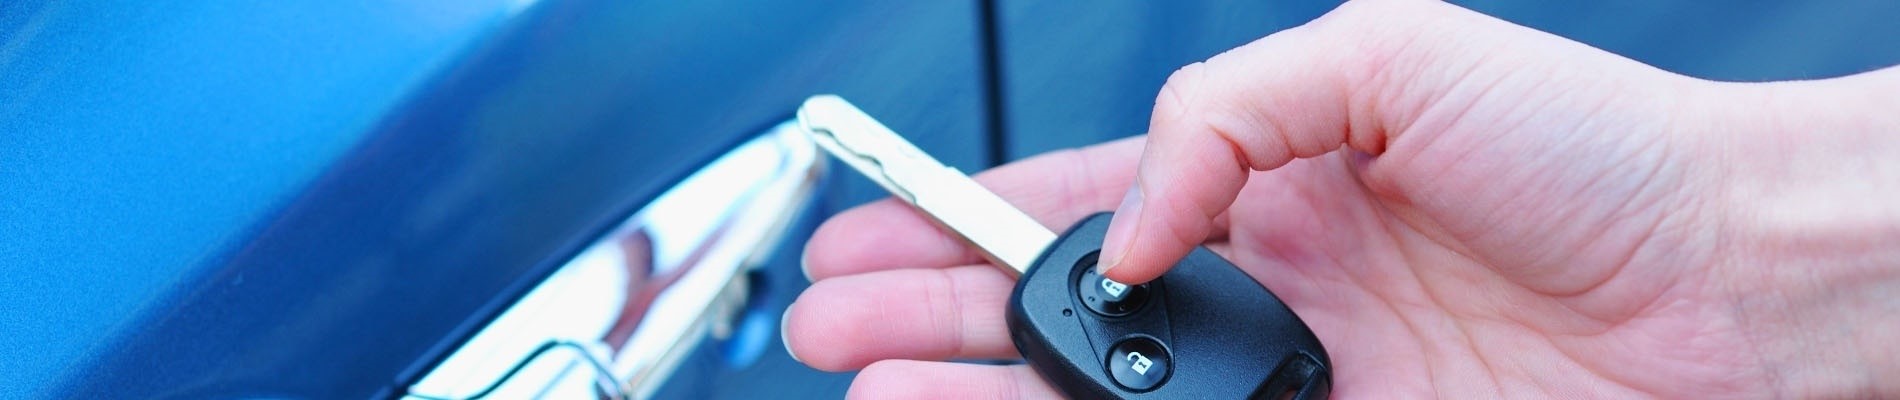 We provide Car key Replacement, Spare Car Keys